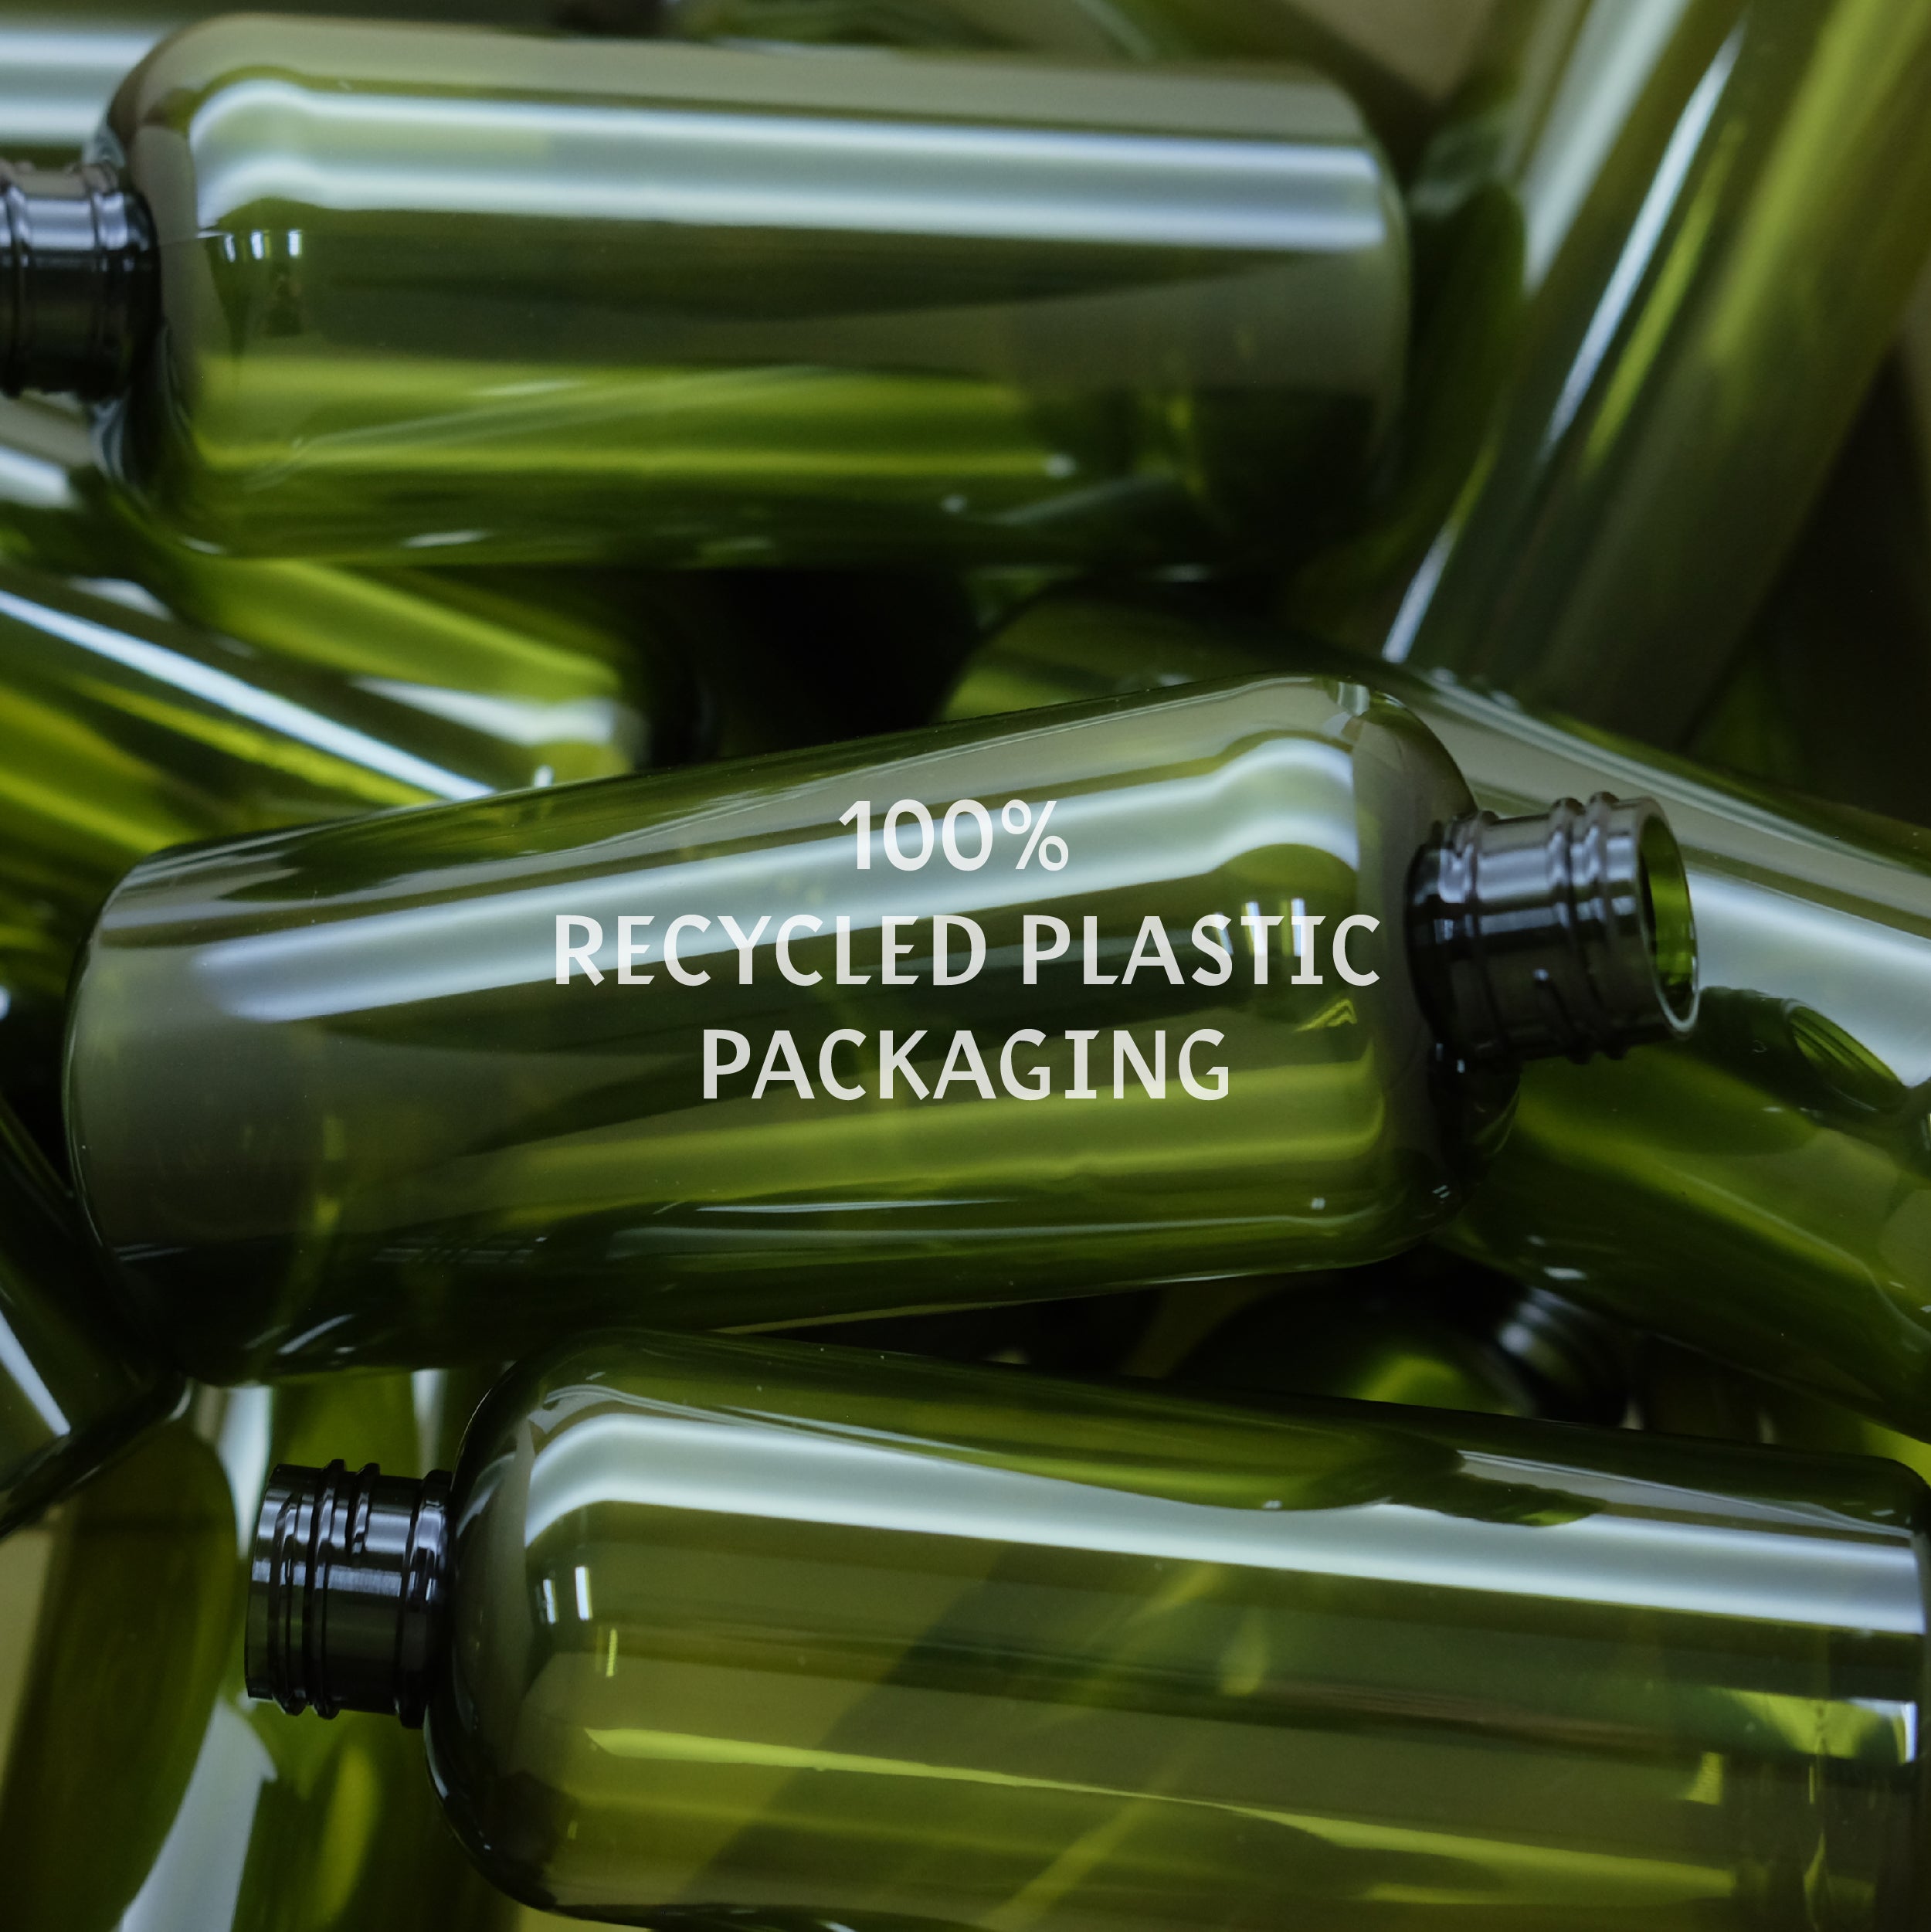 100% Recycled Plastic Packaging, YES.